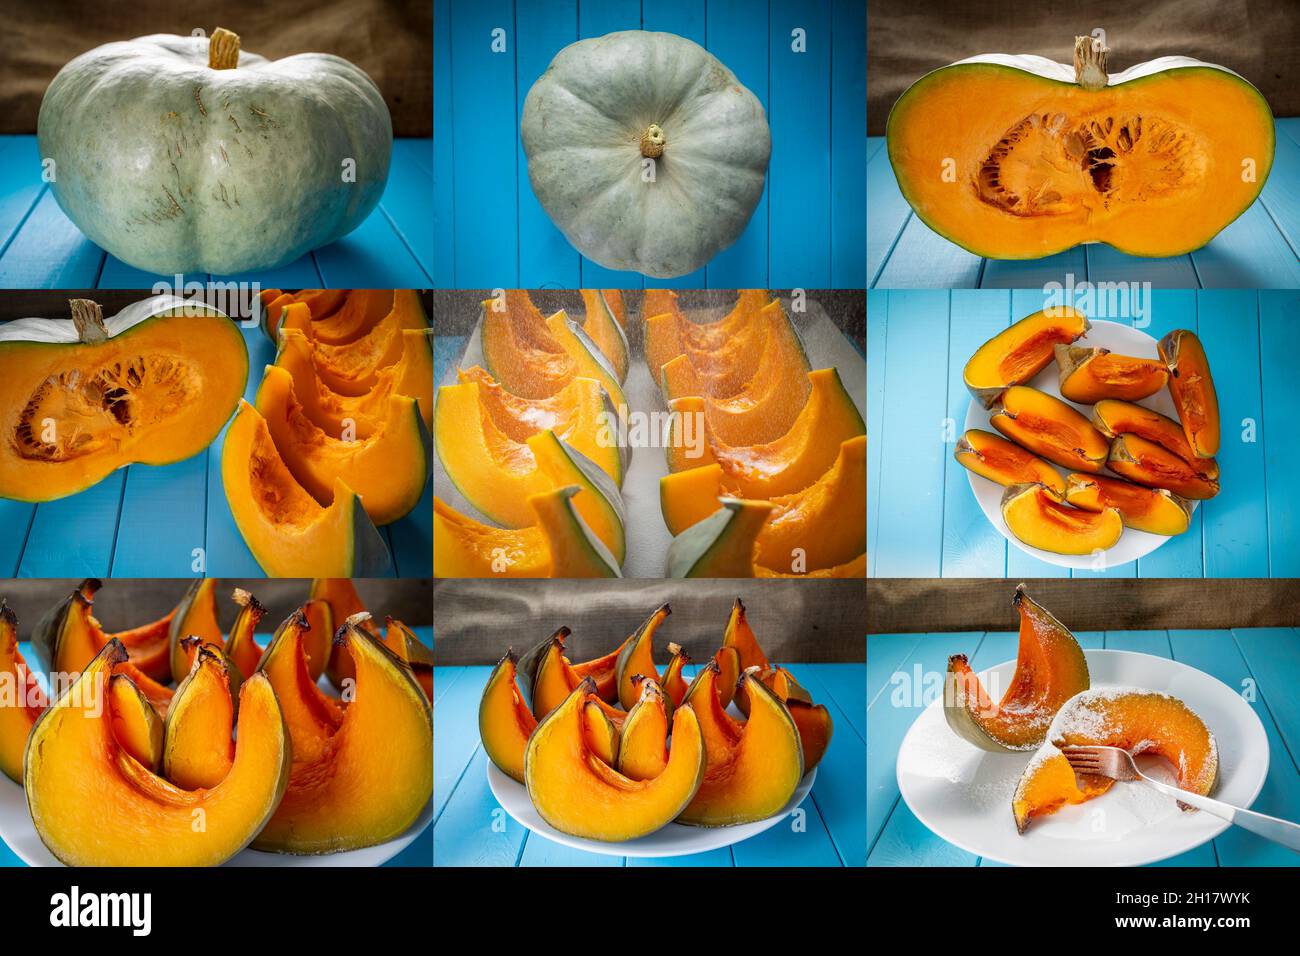 Sweet pumpkin Prince Crown whole process of preparation in one image. Oven baked sweet squash dessert Stock Photo